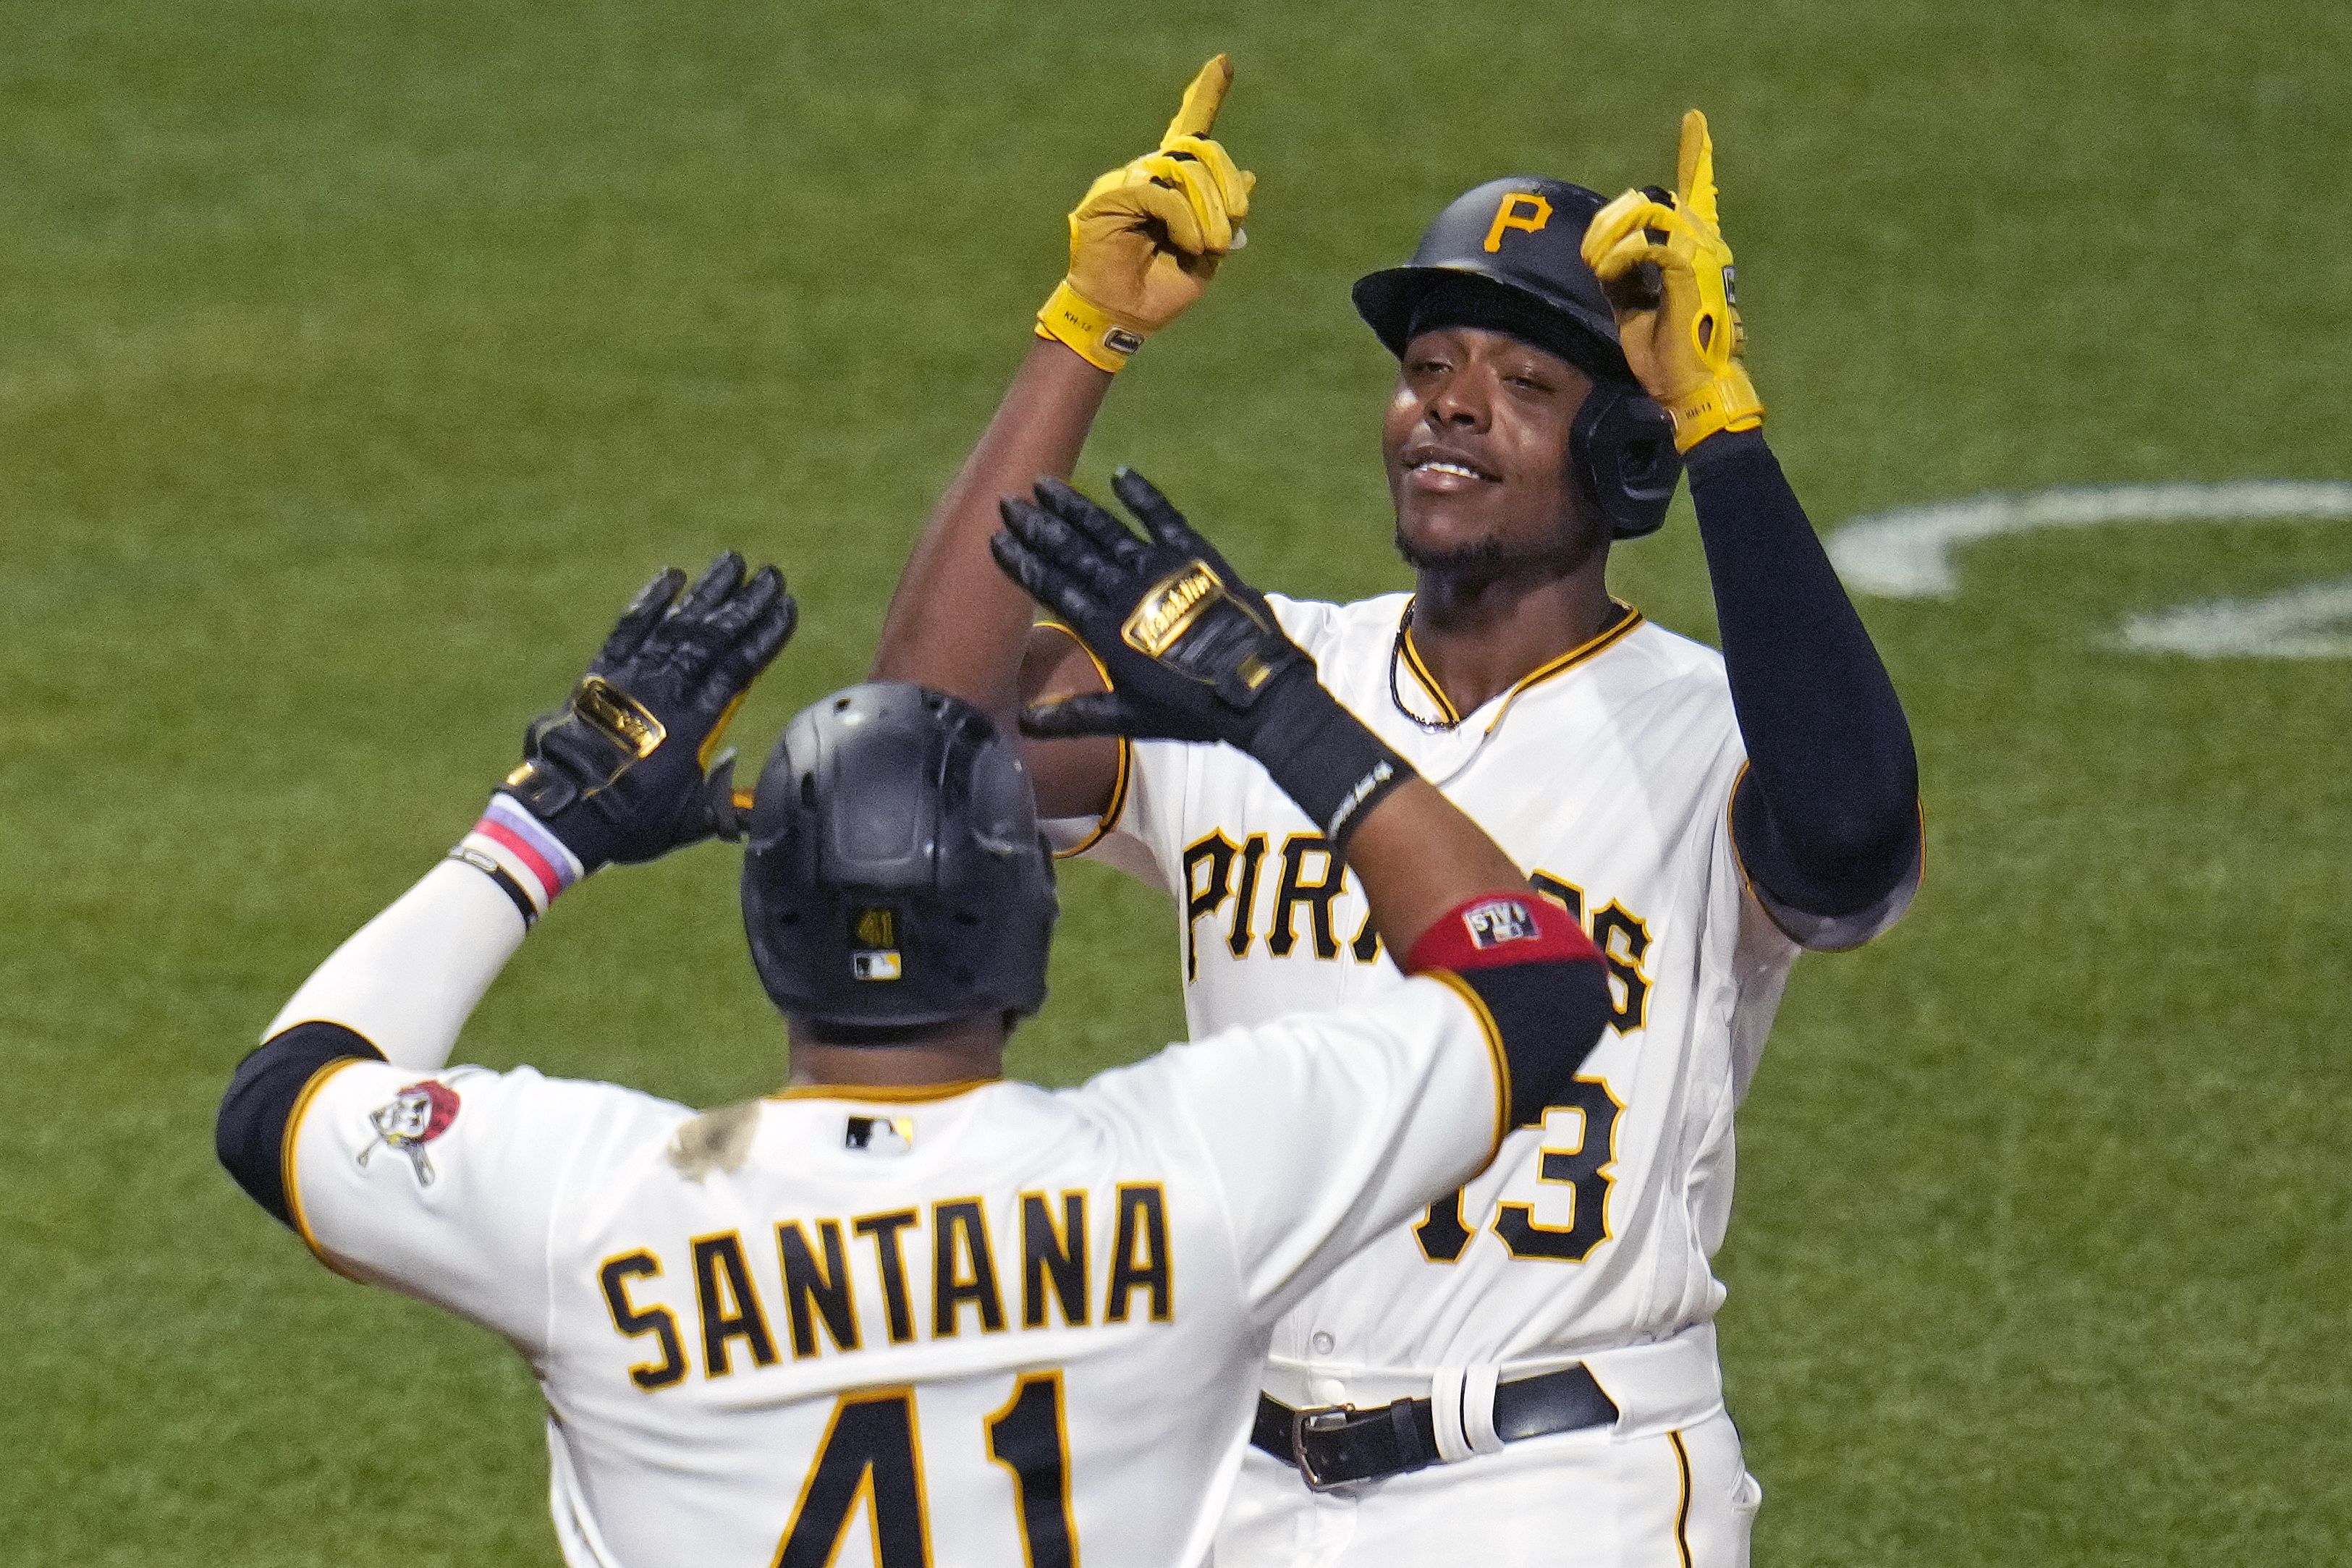 Ke'Bryan Hayes goes 5 for 5 as Pirates outlast Mets 14-7 – WPXI